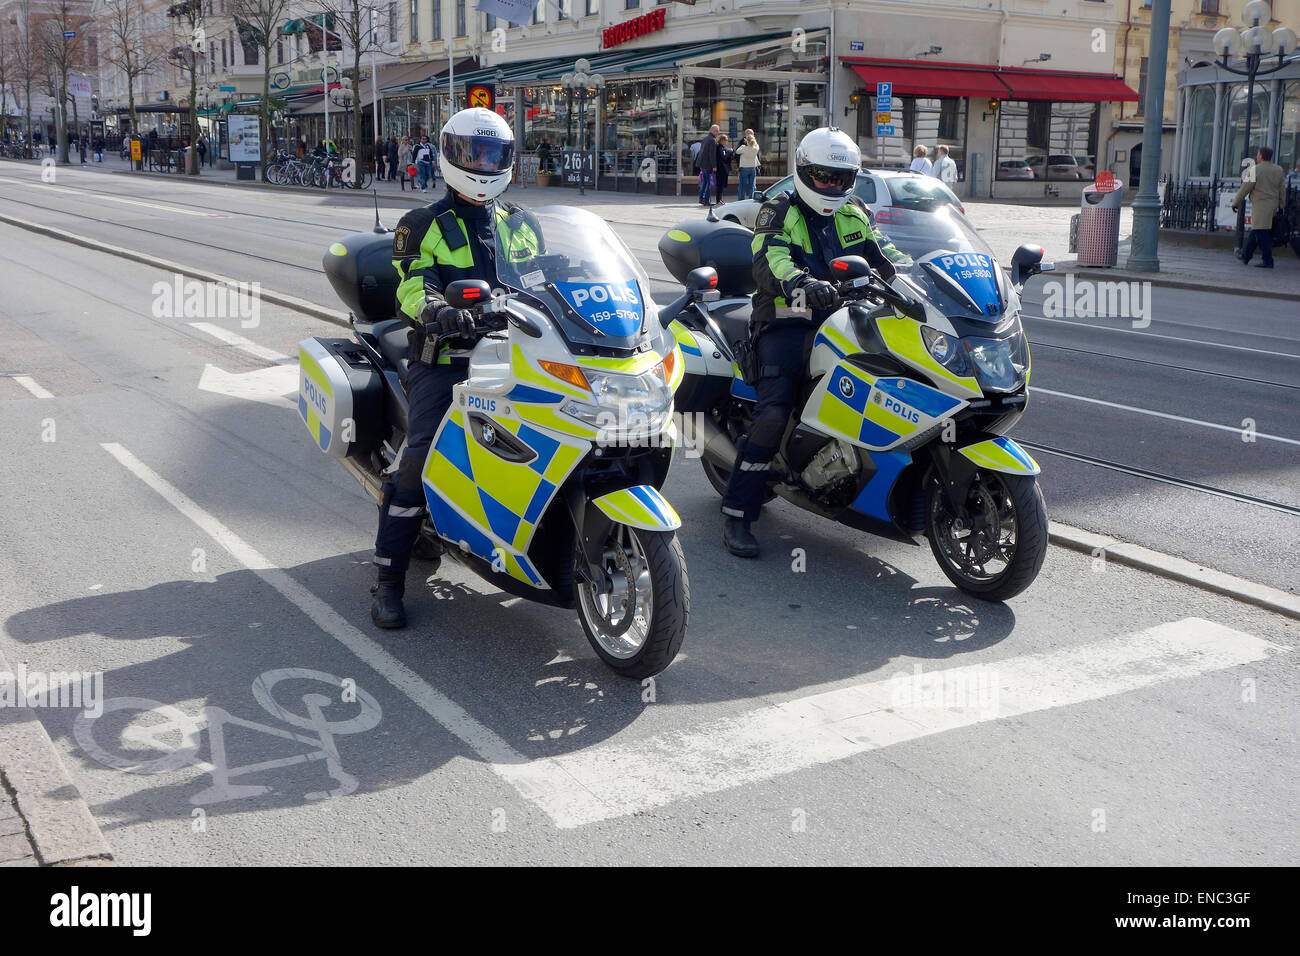 Two Swedish police officers patrolling on motorcycles stop and wait for green traffic light Stock Photo